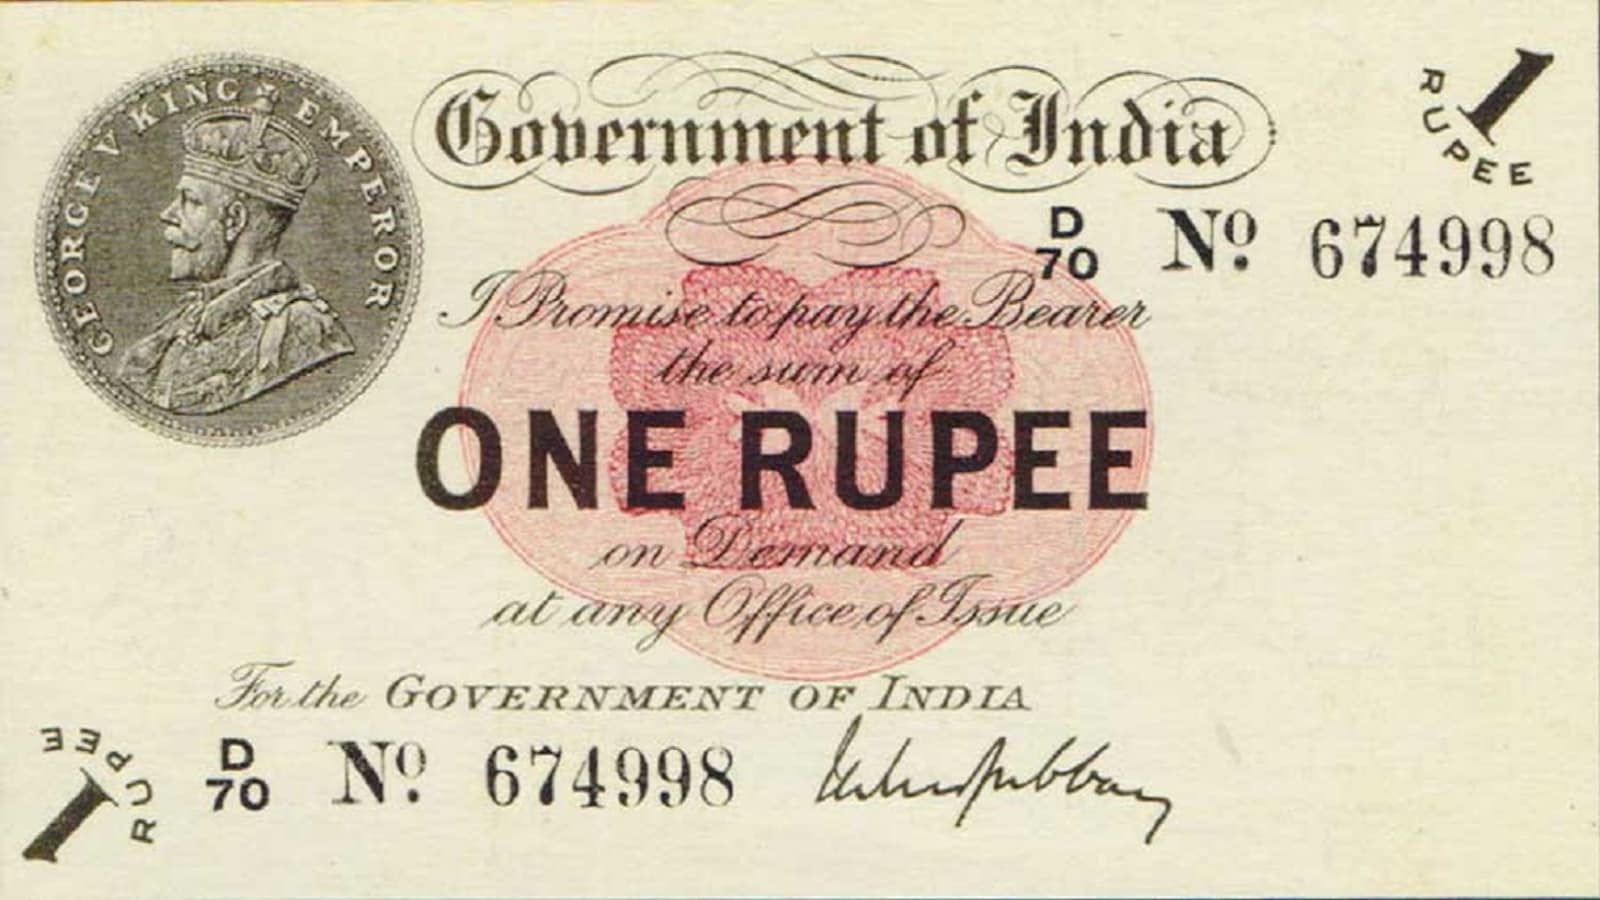 Here are some interesting facts about the Re 1 note which is now a century  old